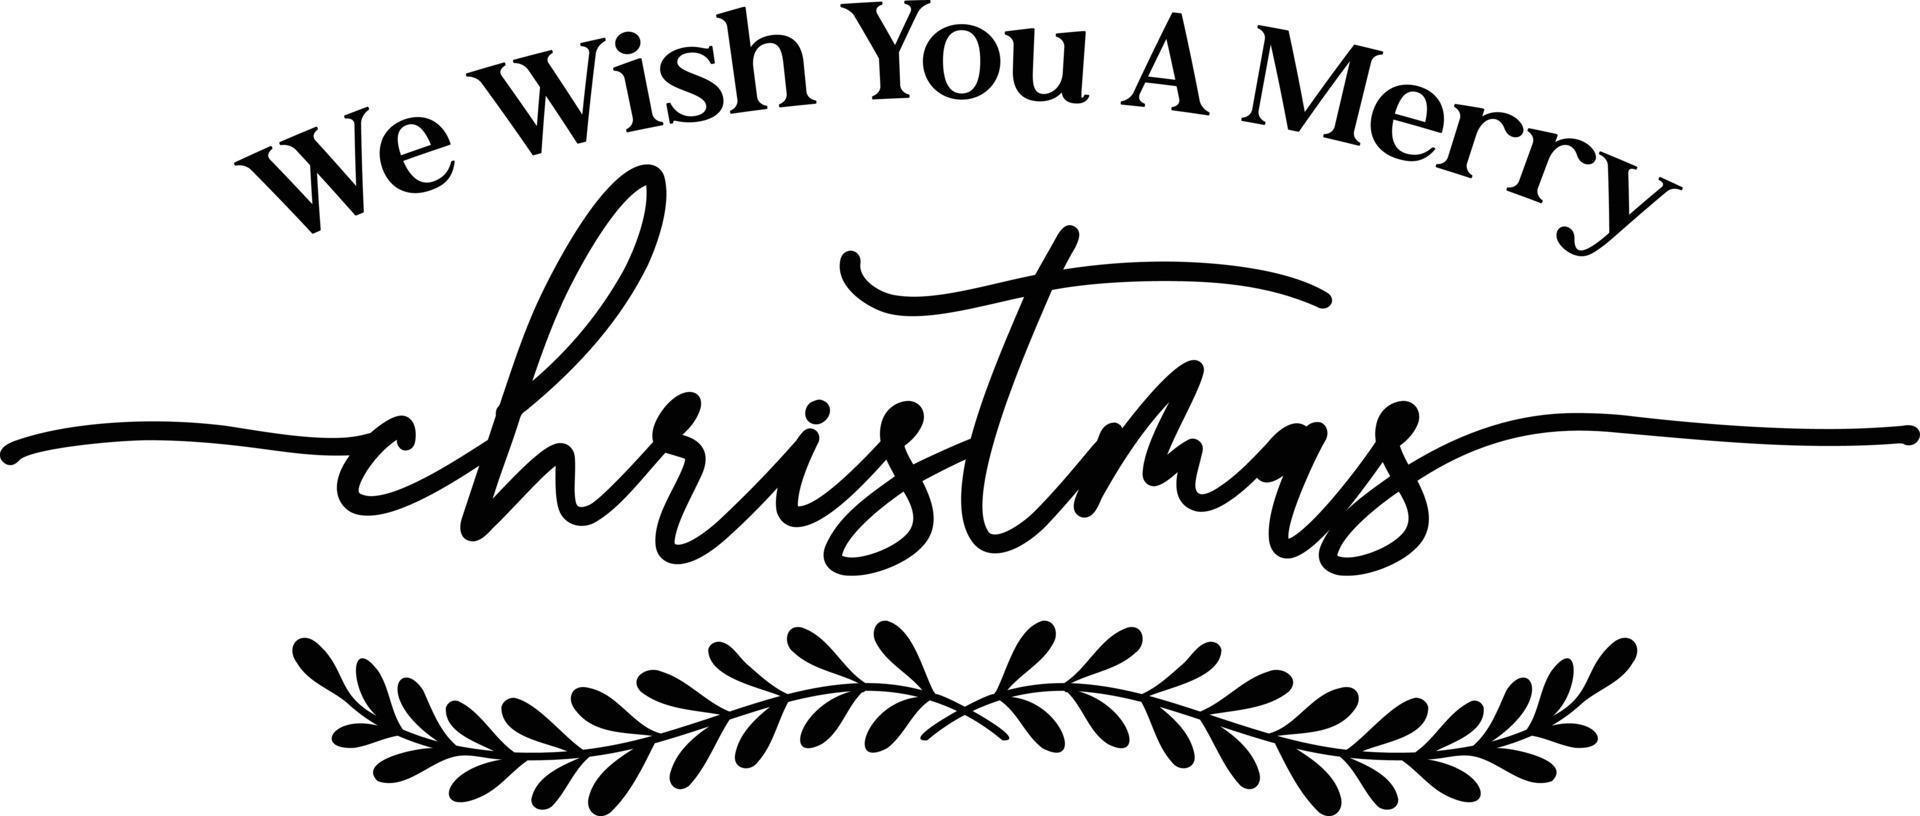 We Wish You A Merry Christmas lettering and quote illustration vector